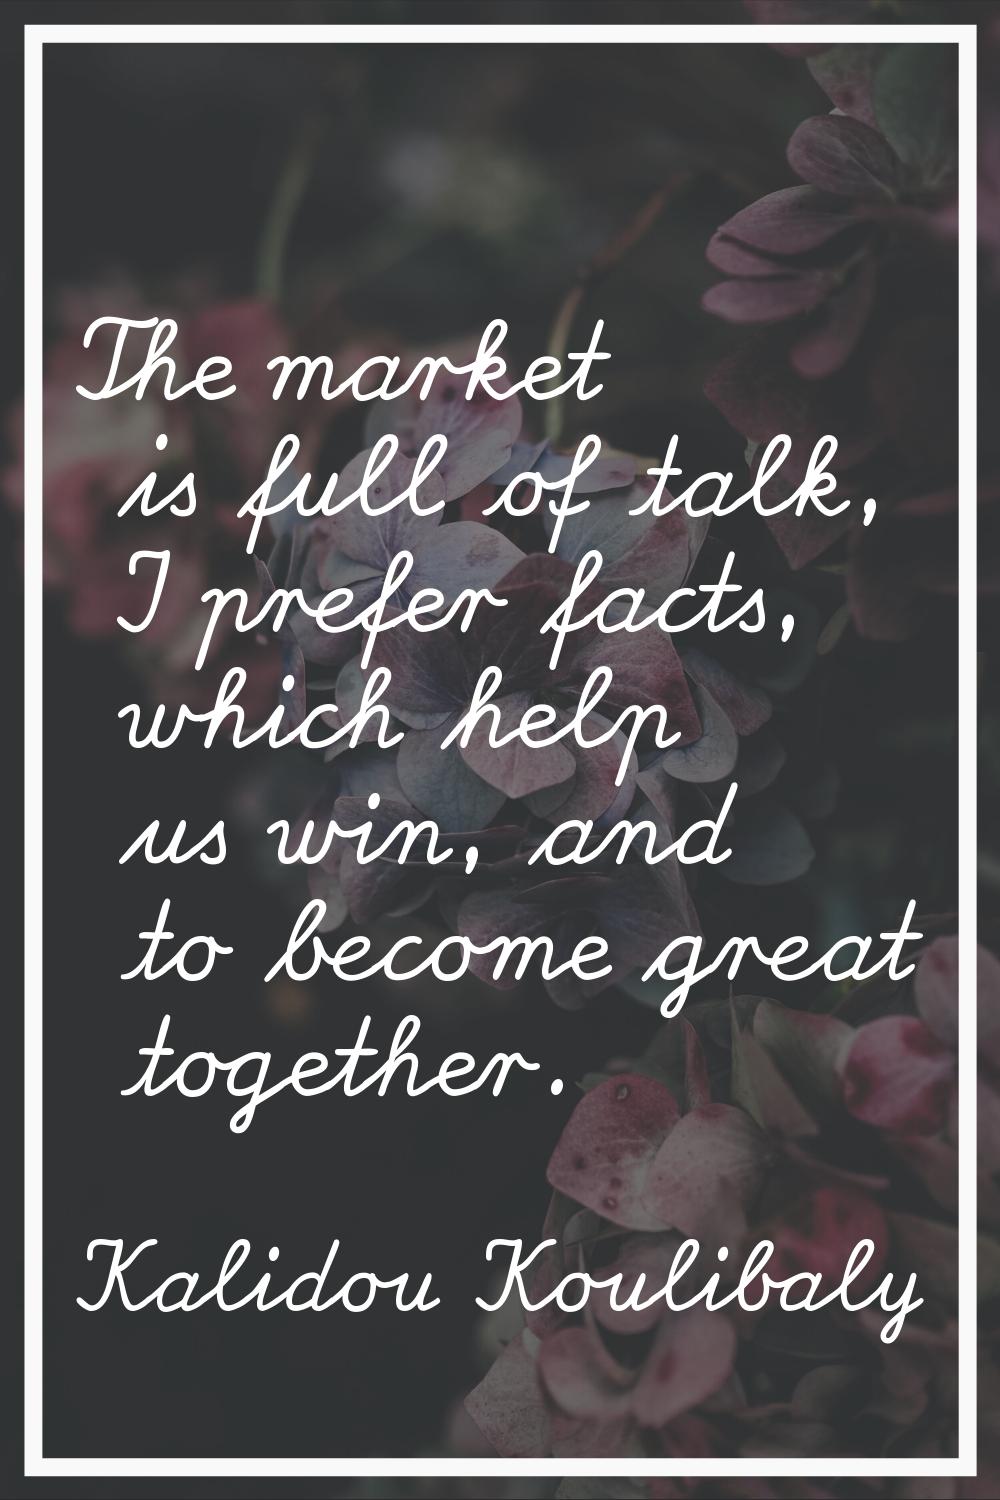 The market is full of talk, I prefer facts, which help us win, and to become great together.